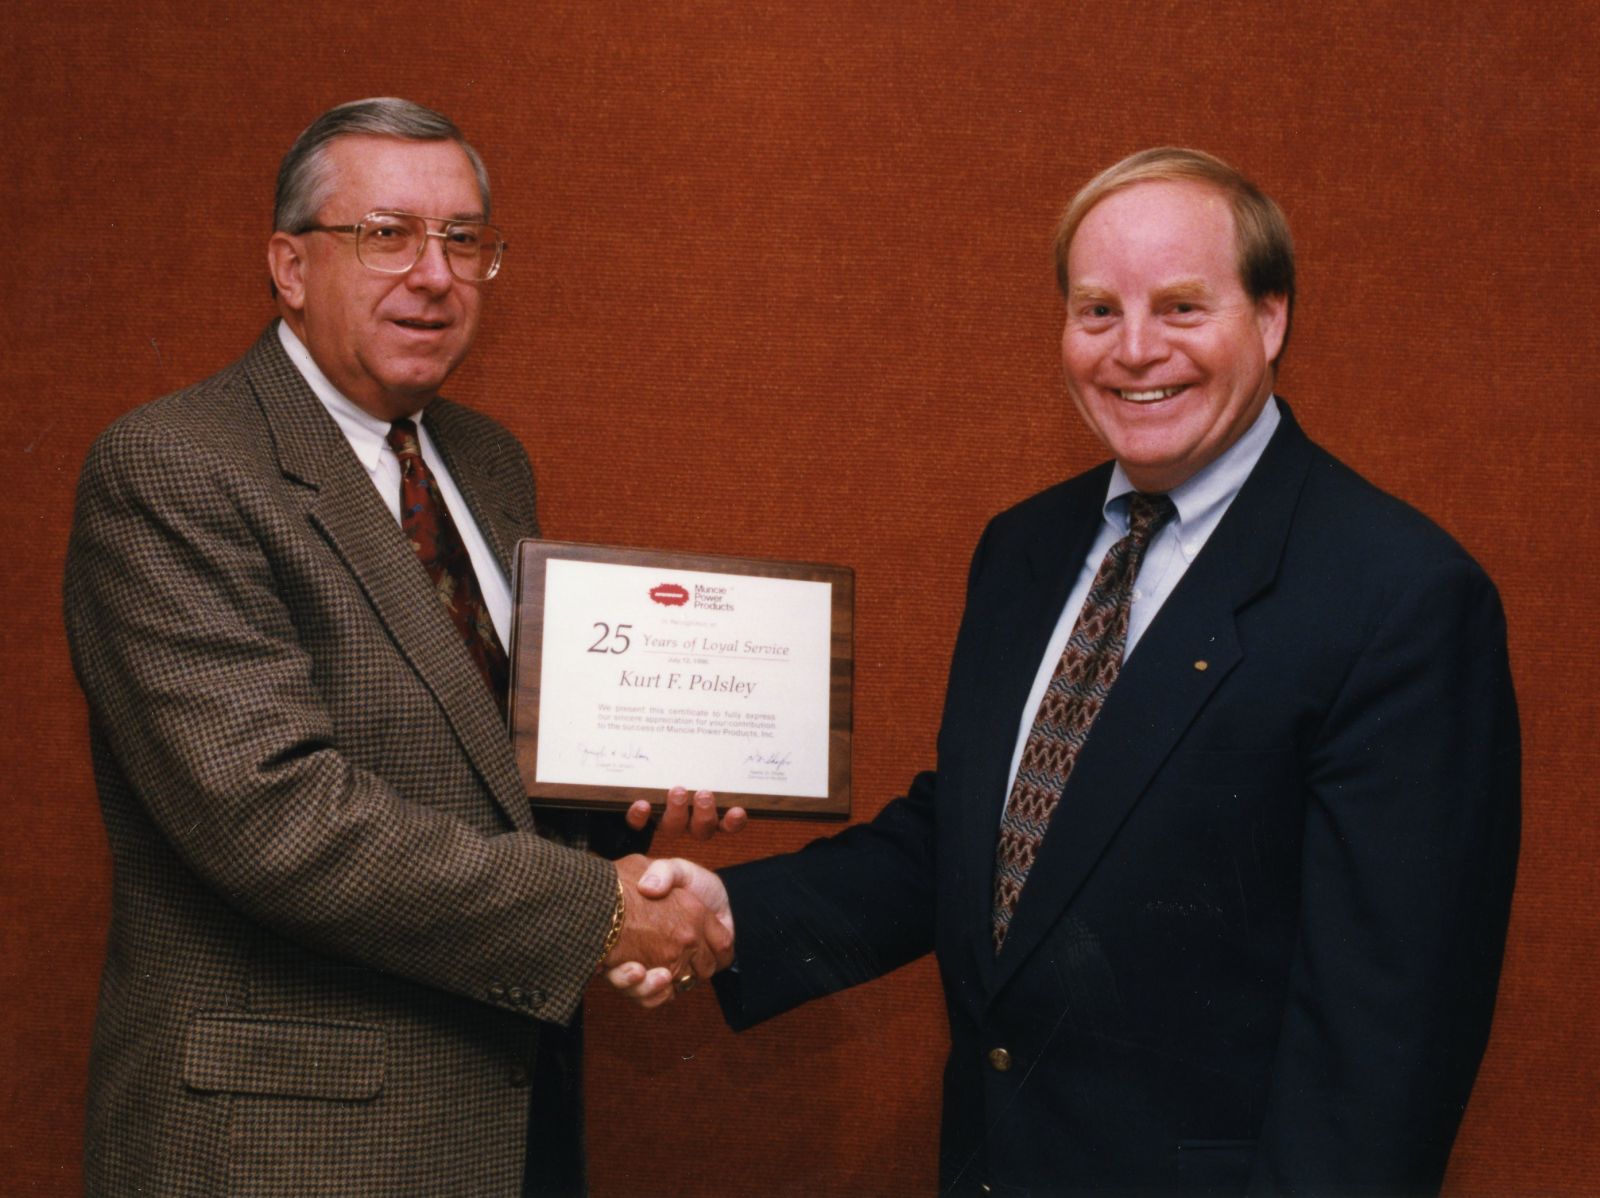 An archival photo of Kurt Polsley receiving his 25th anniversary plaque in 1996.